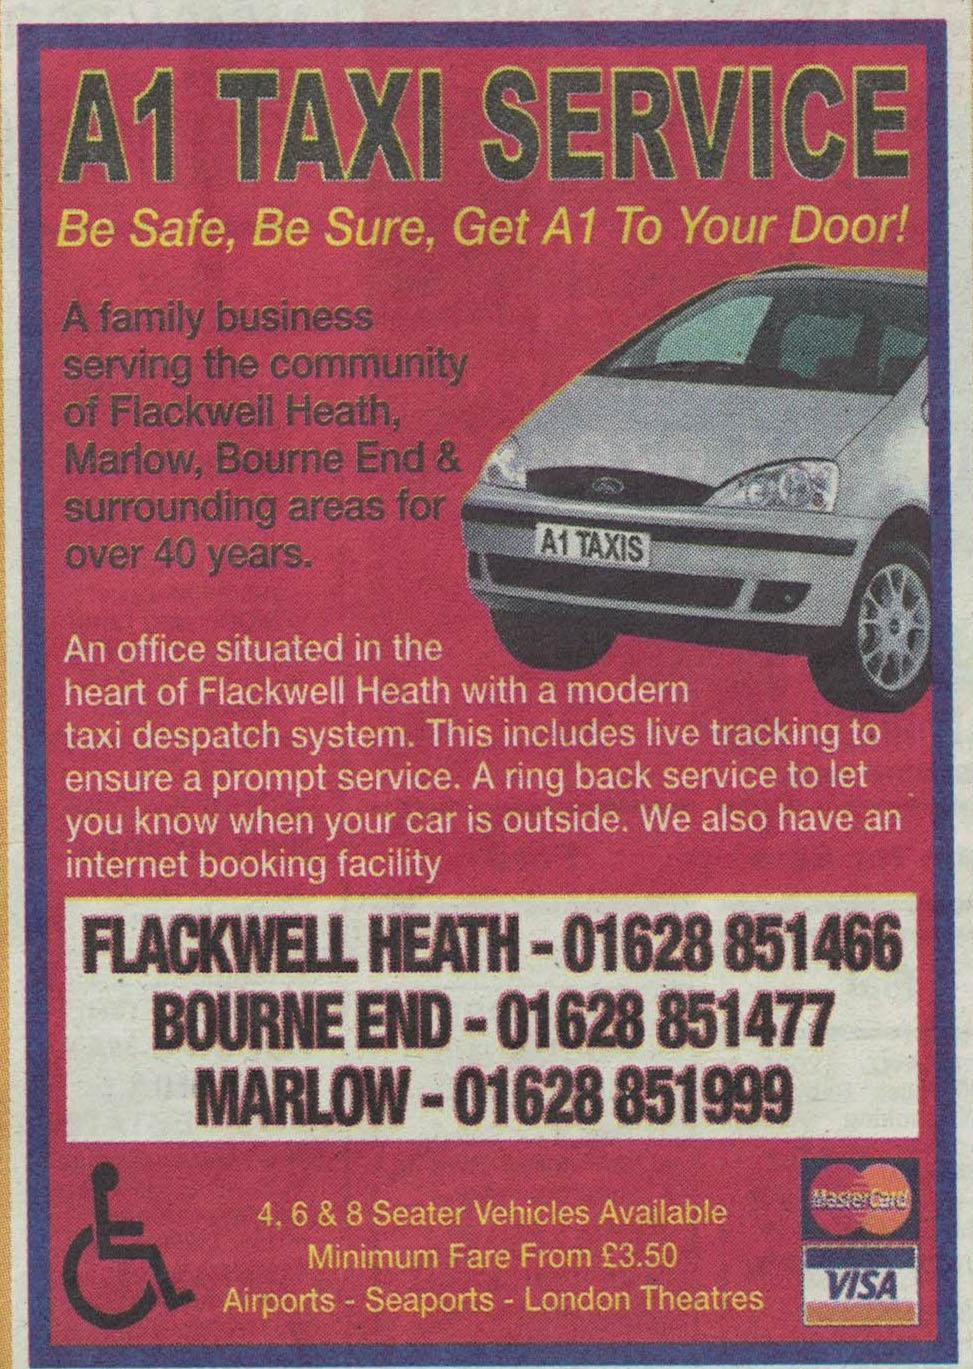 Advertising in the local paper - circa 2011